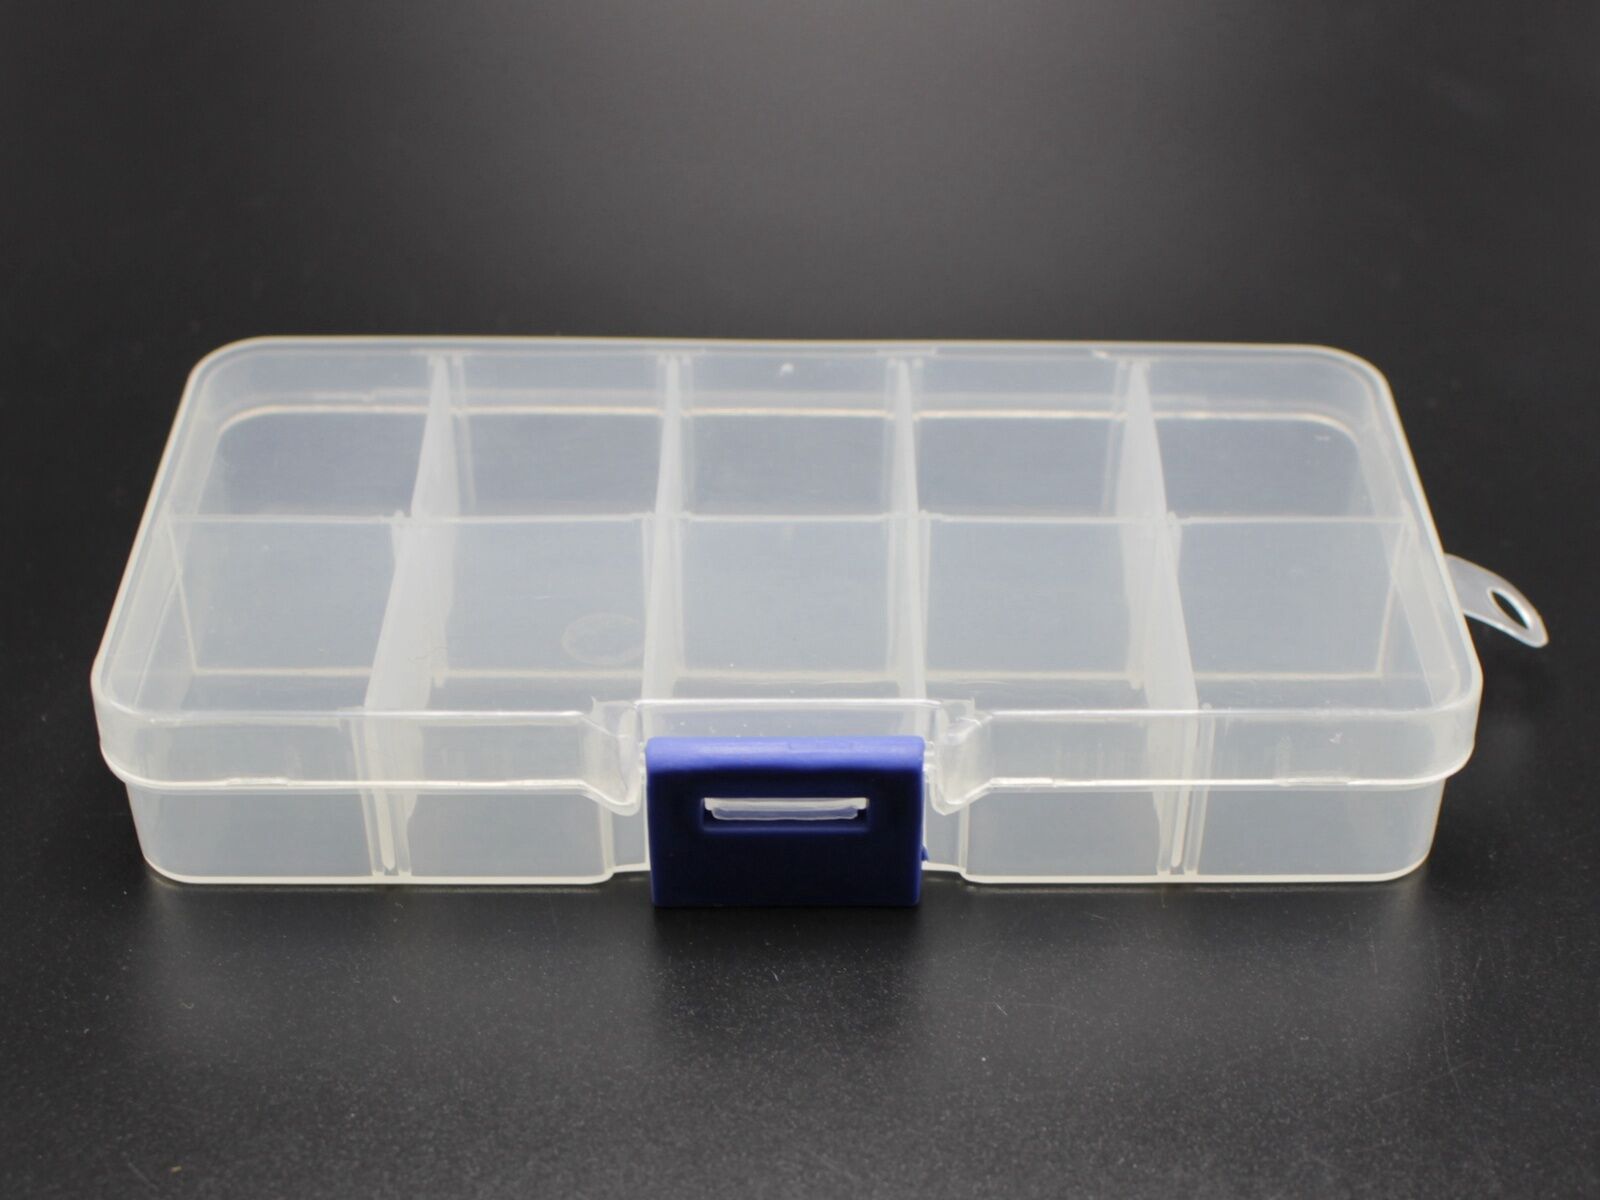 Clear Plastic Box Case 10 Storage compartments Time sale Con Max 82% OFF Display Beads